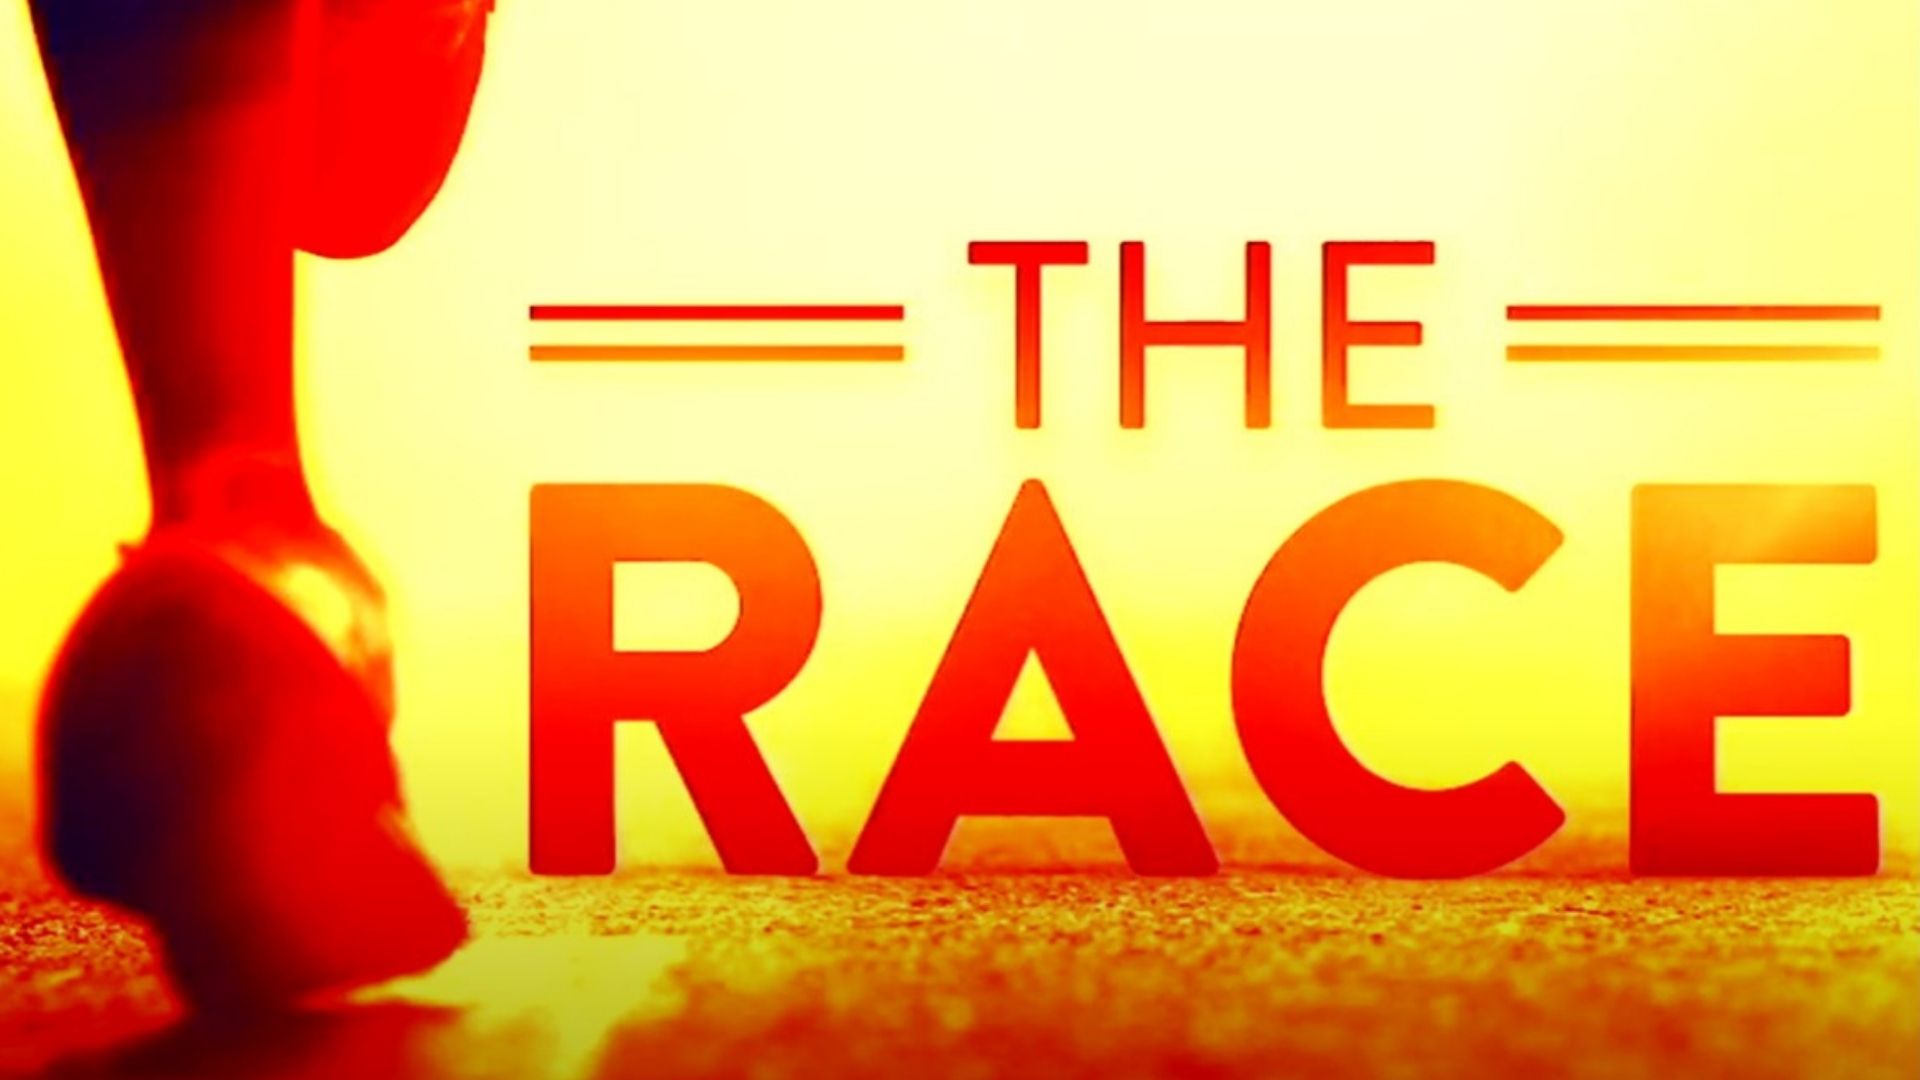 Image of The Race Sermon Series at The Station Church in Hoover, Alabama